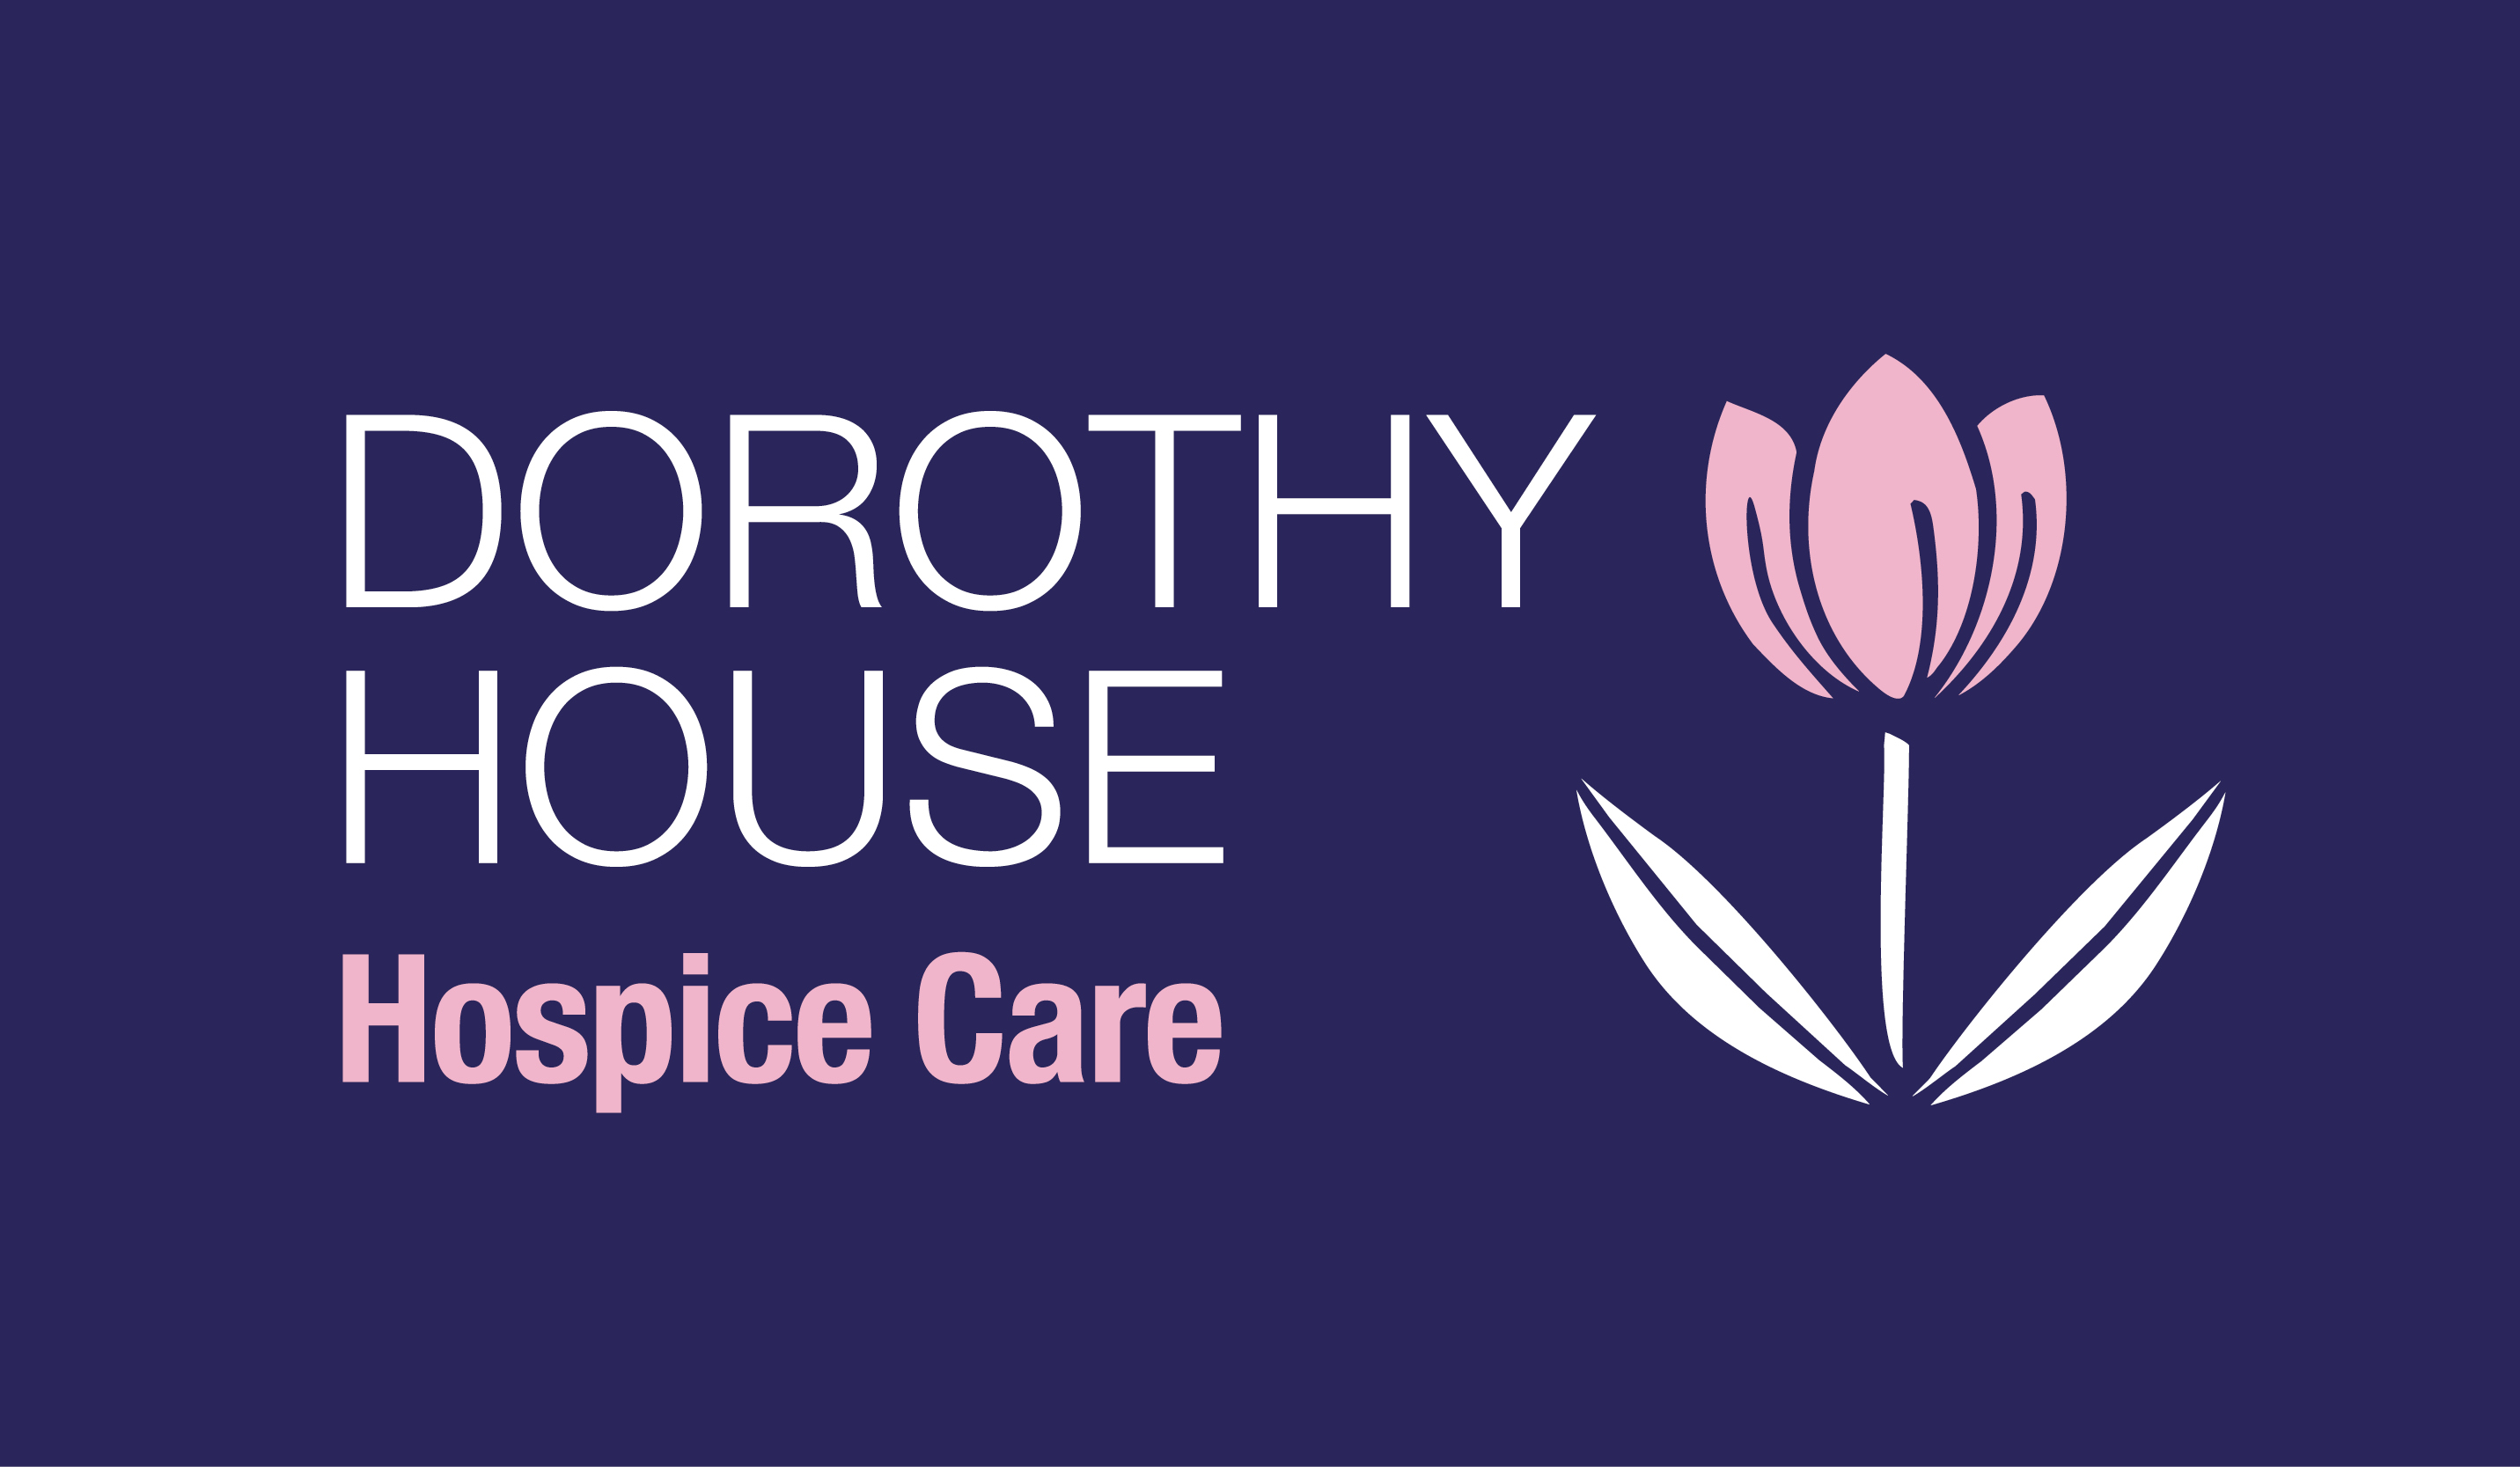 The House helps Dorothy House Hospice Care when it matters most